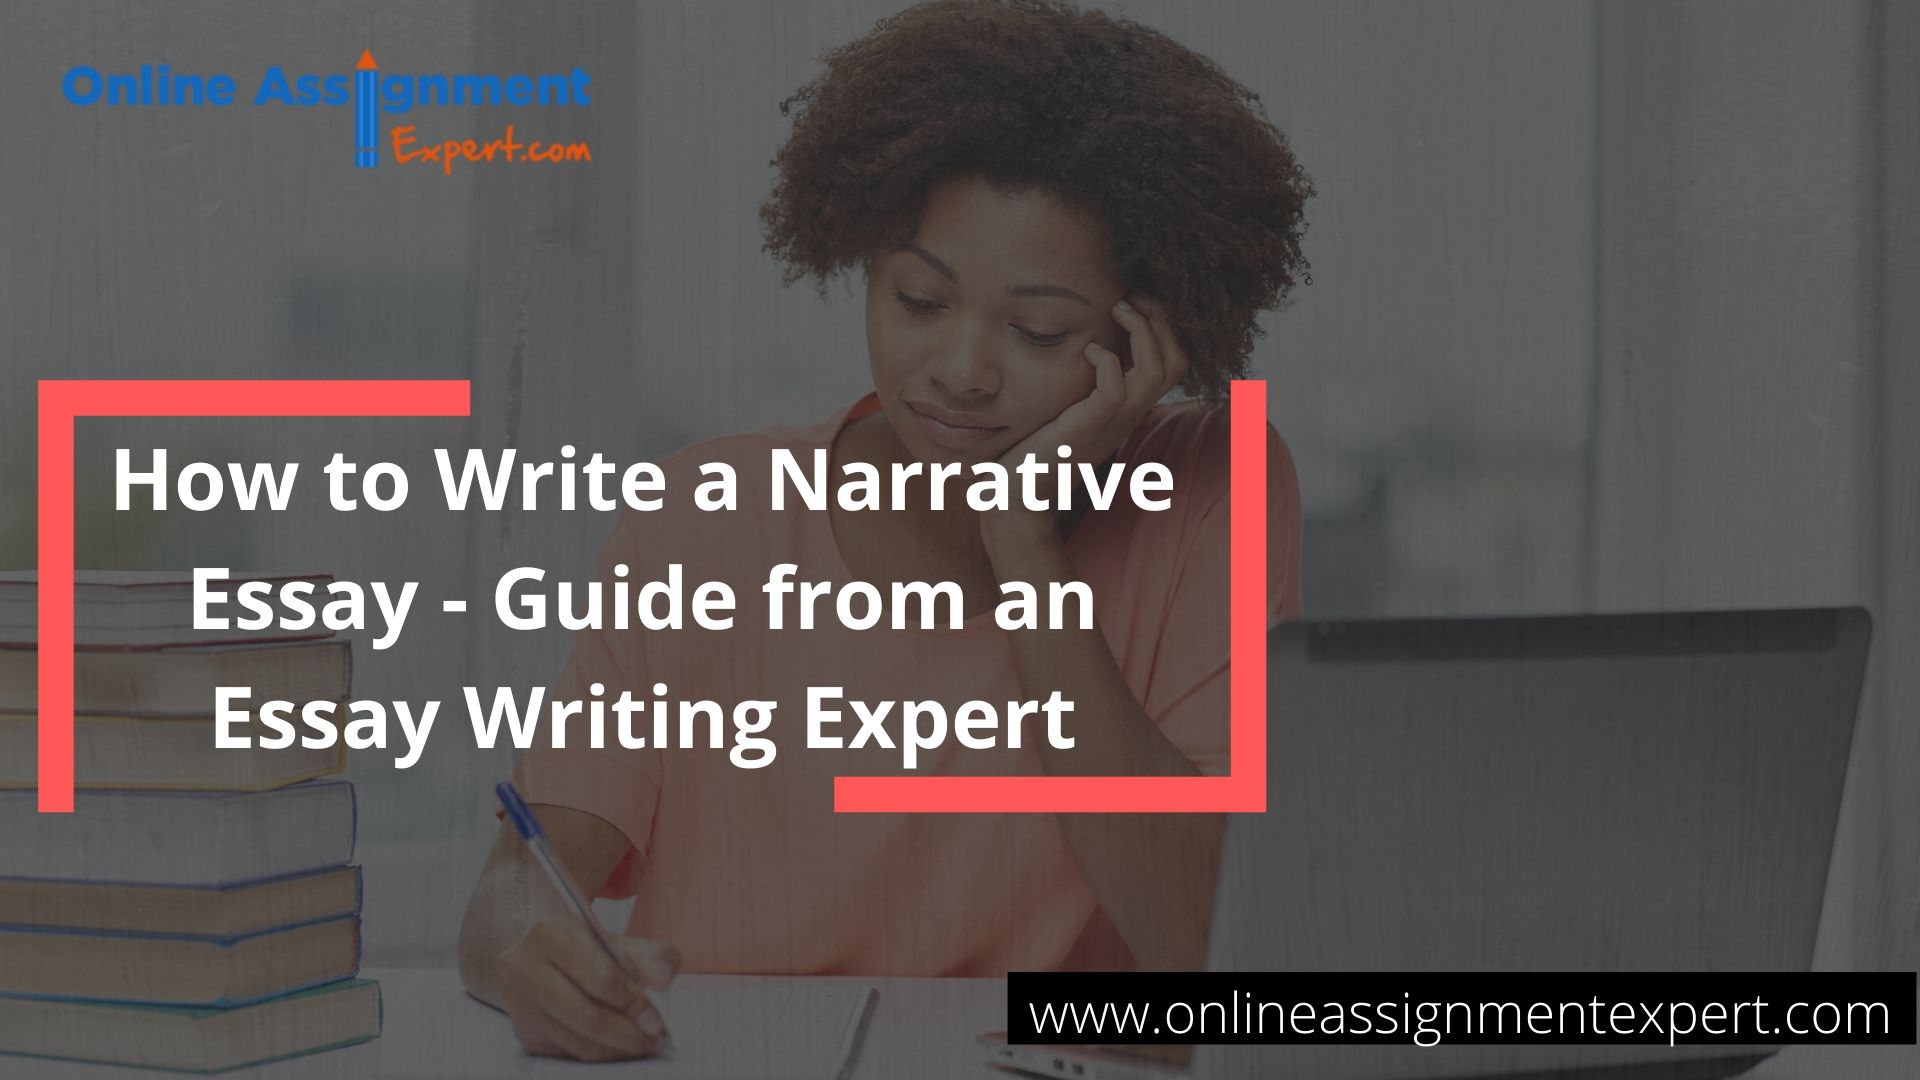 How to Write a Narrative Essay - Guide from an Essay Writing Expert